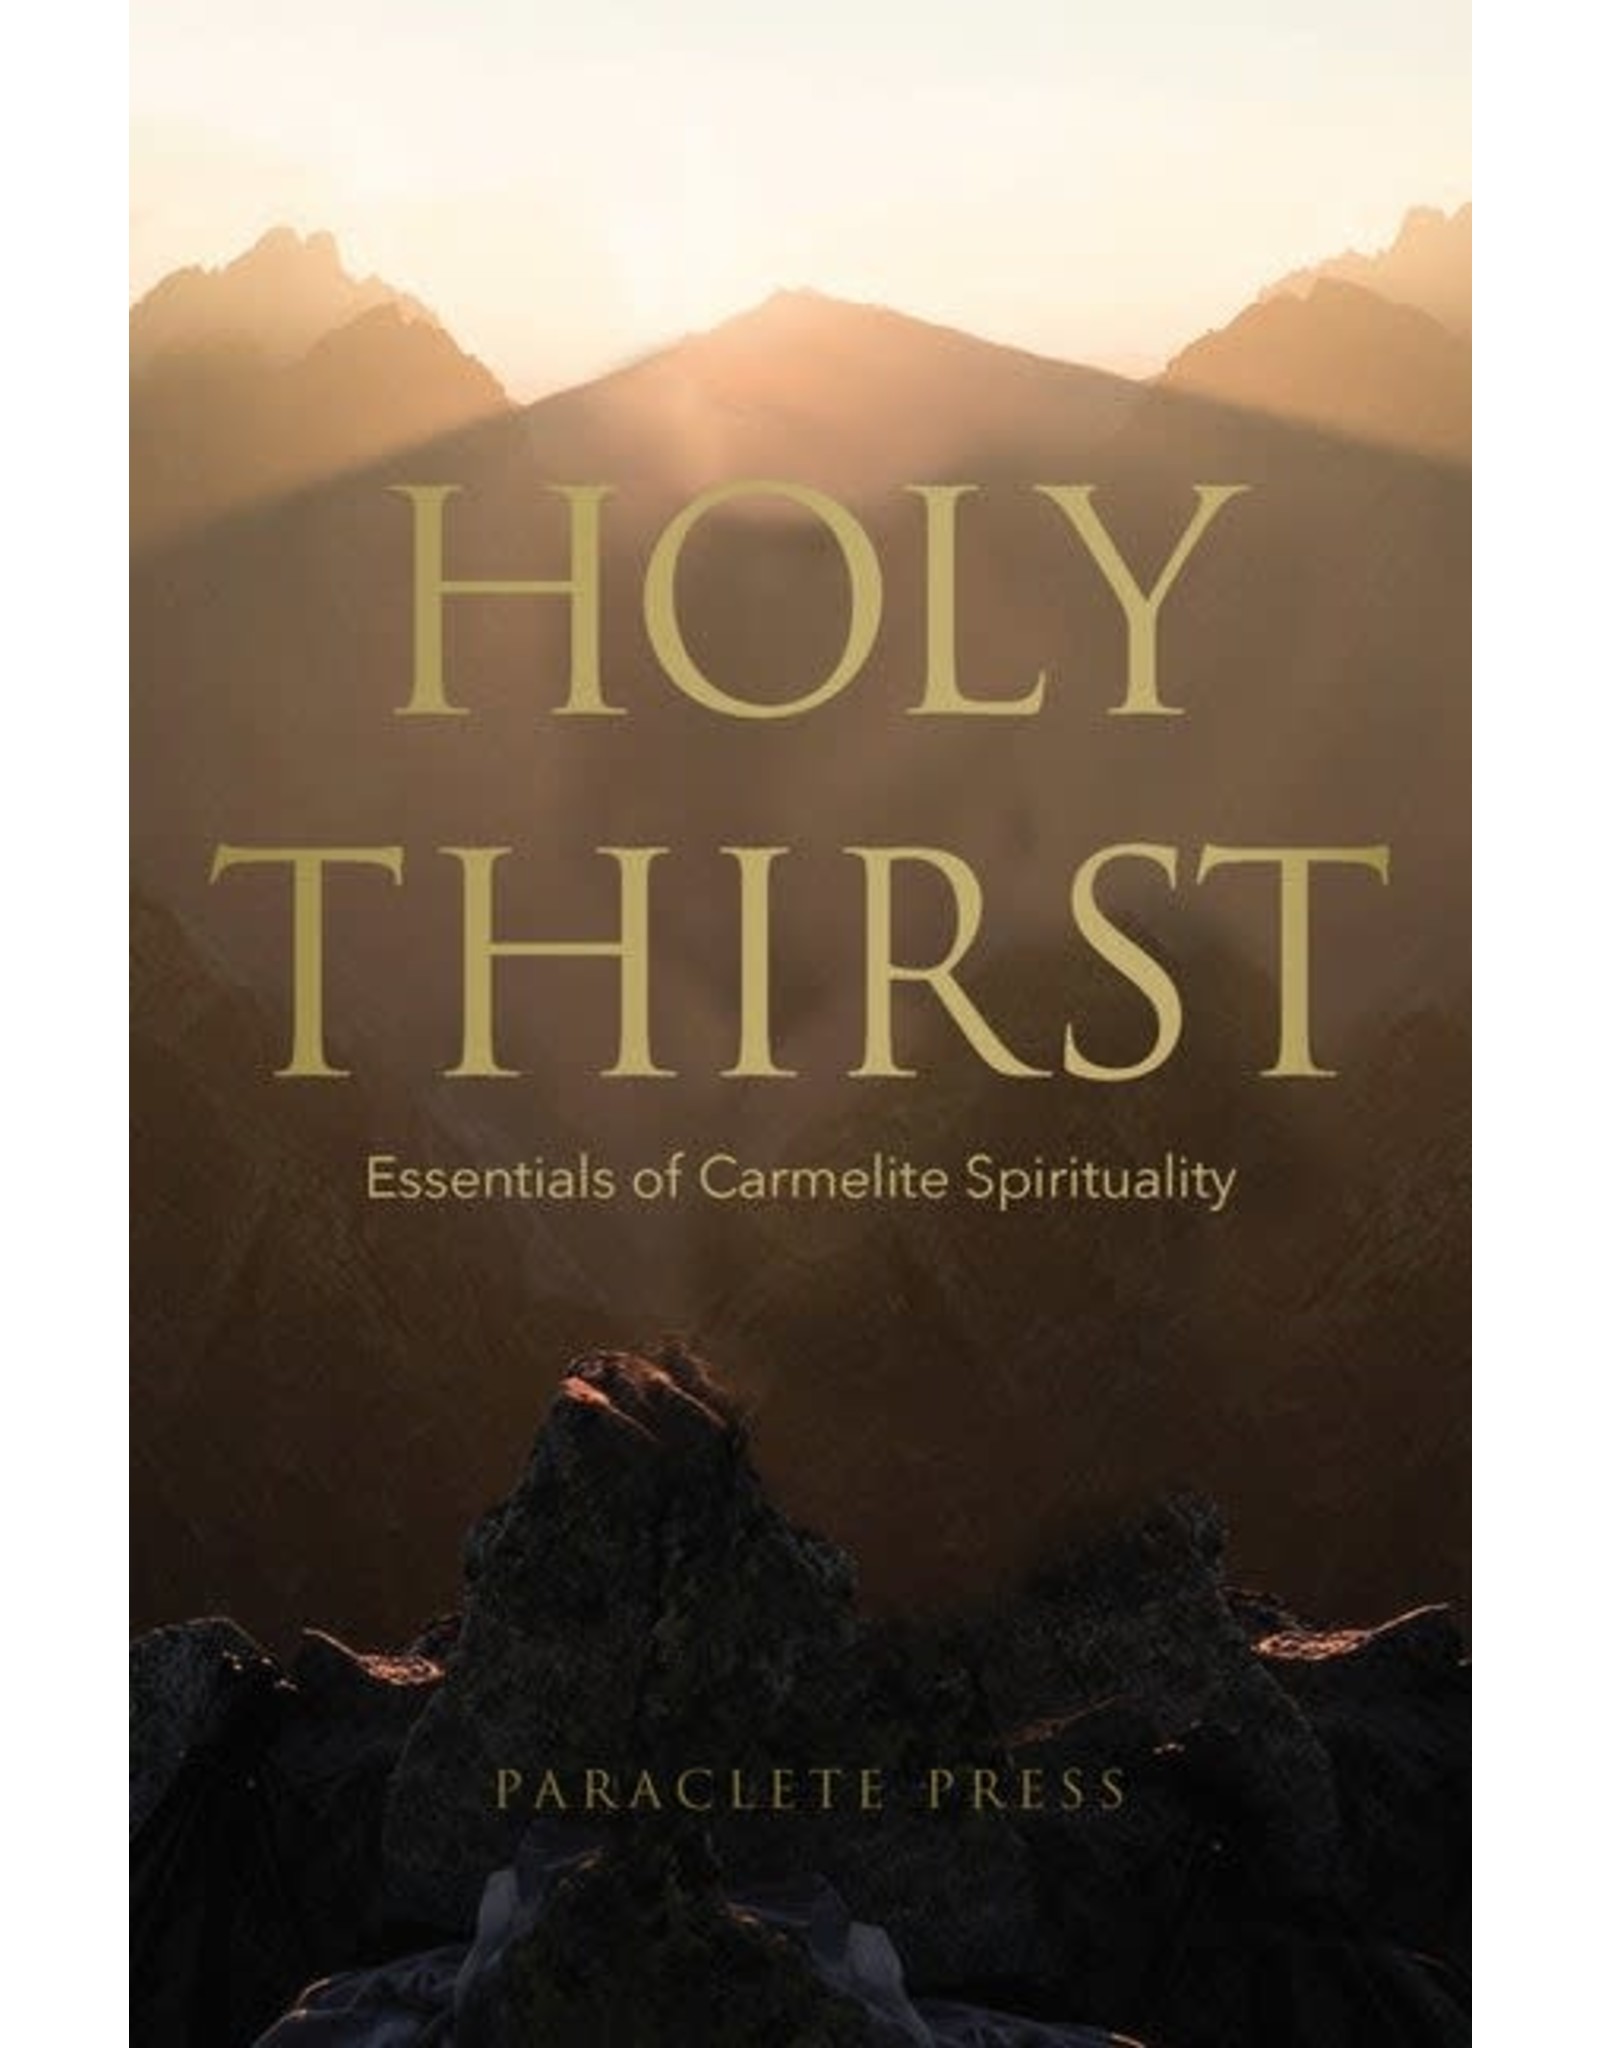 Paraclete Press Holy Thirst: Essentials of Carmelite Spirituality by Paraclete Press (Paperback)